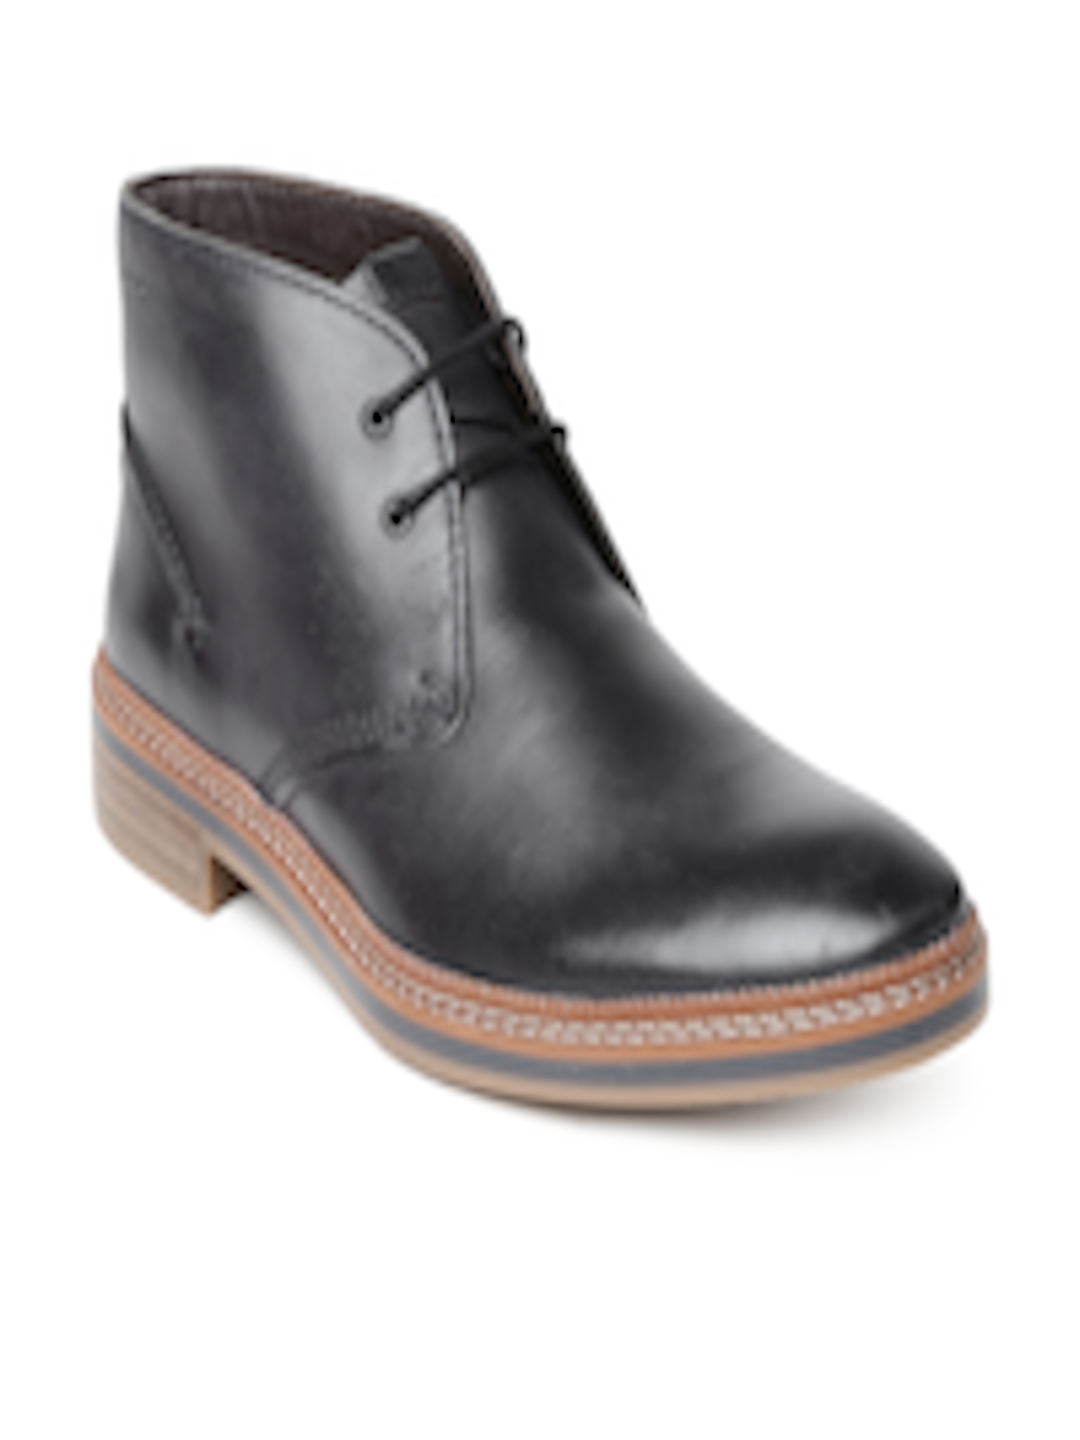 Buy Clarks Men Black Grimsby Leather Chukka Boots - Boots for Men ...